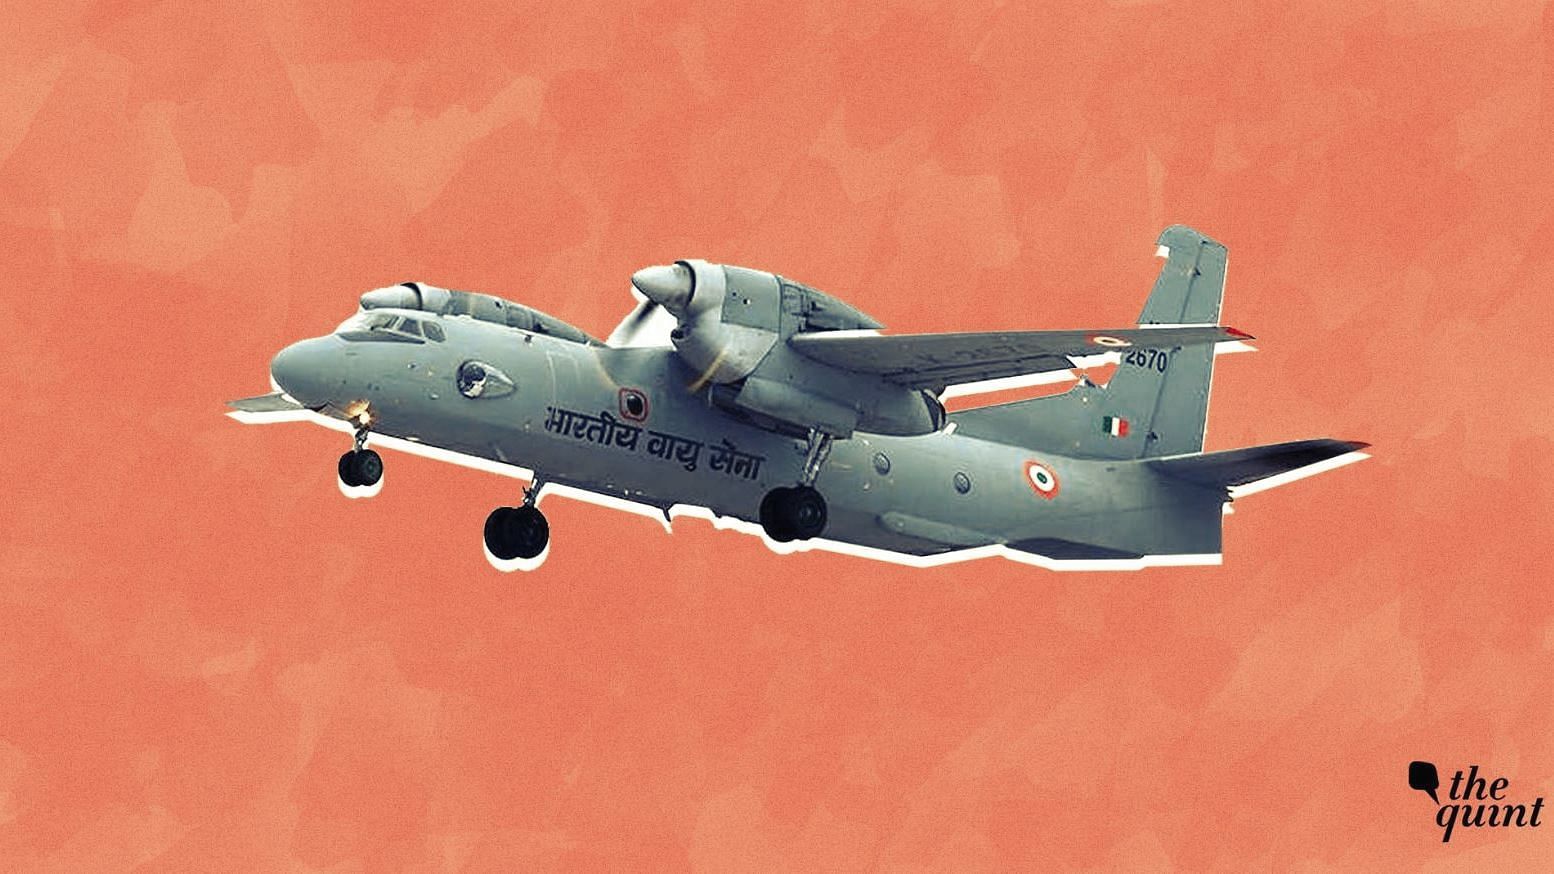 The Indian Air Force has lost nearly 10 aircraft this year.